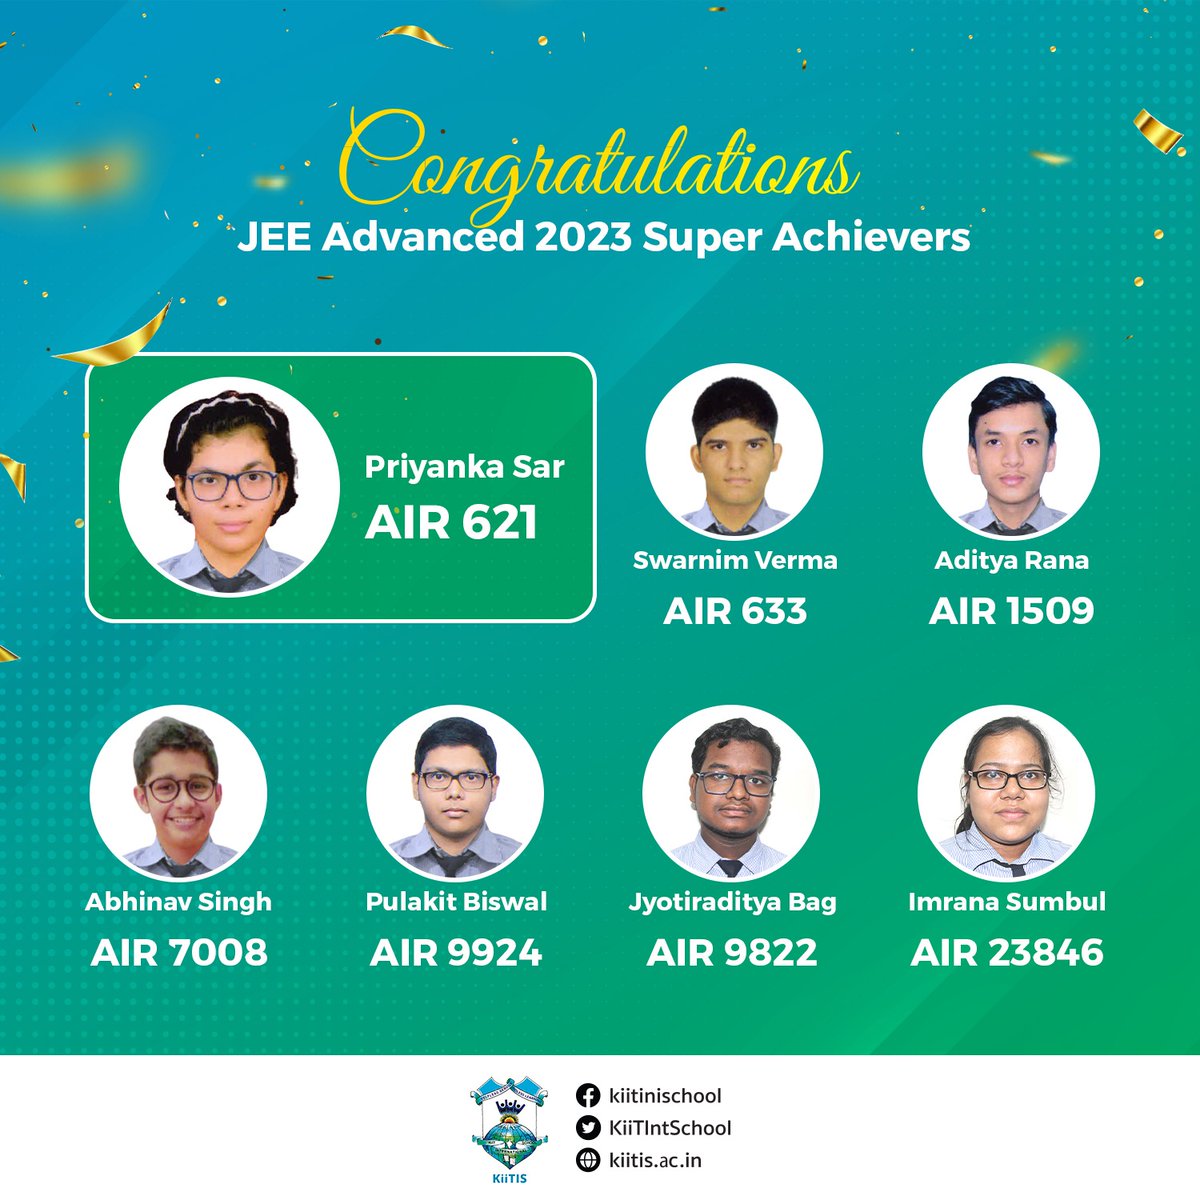 The 2023 JEE Advanced Results are out!

Big Congratulations to all the super achievers from KiiTIS.

#KiitIS #Achievement #JEE2023